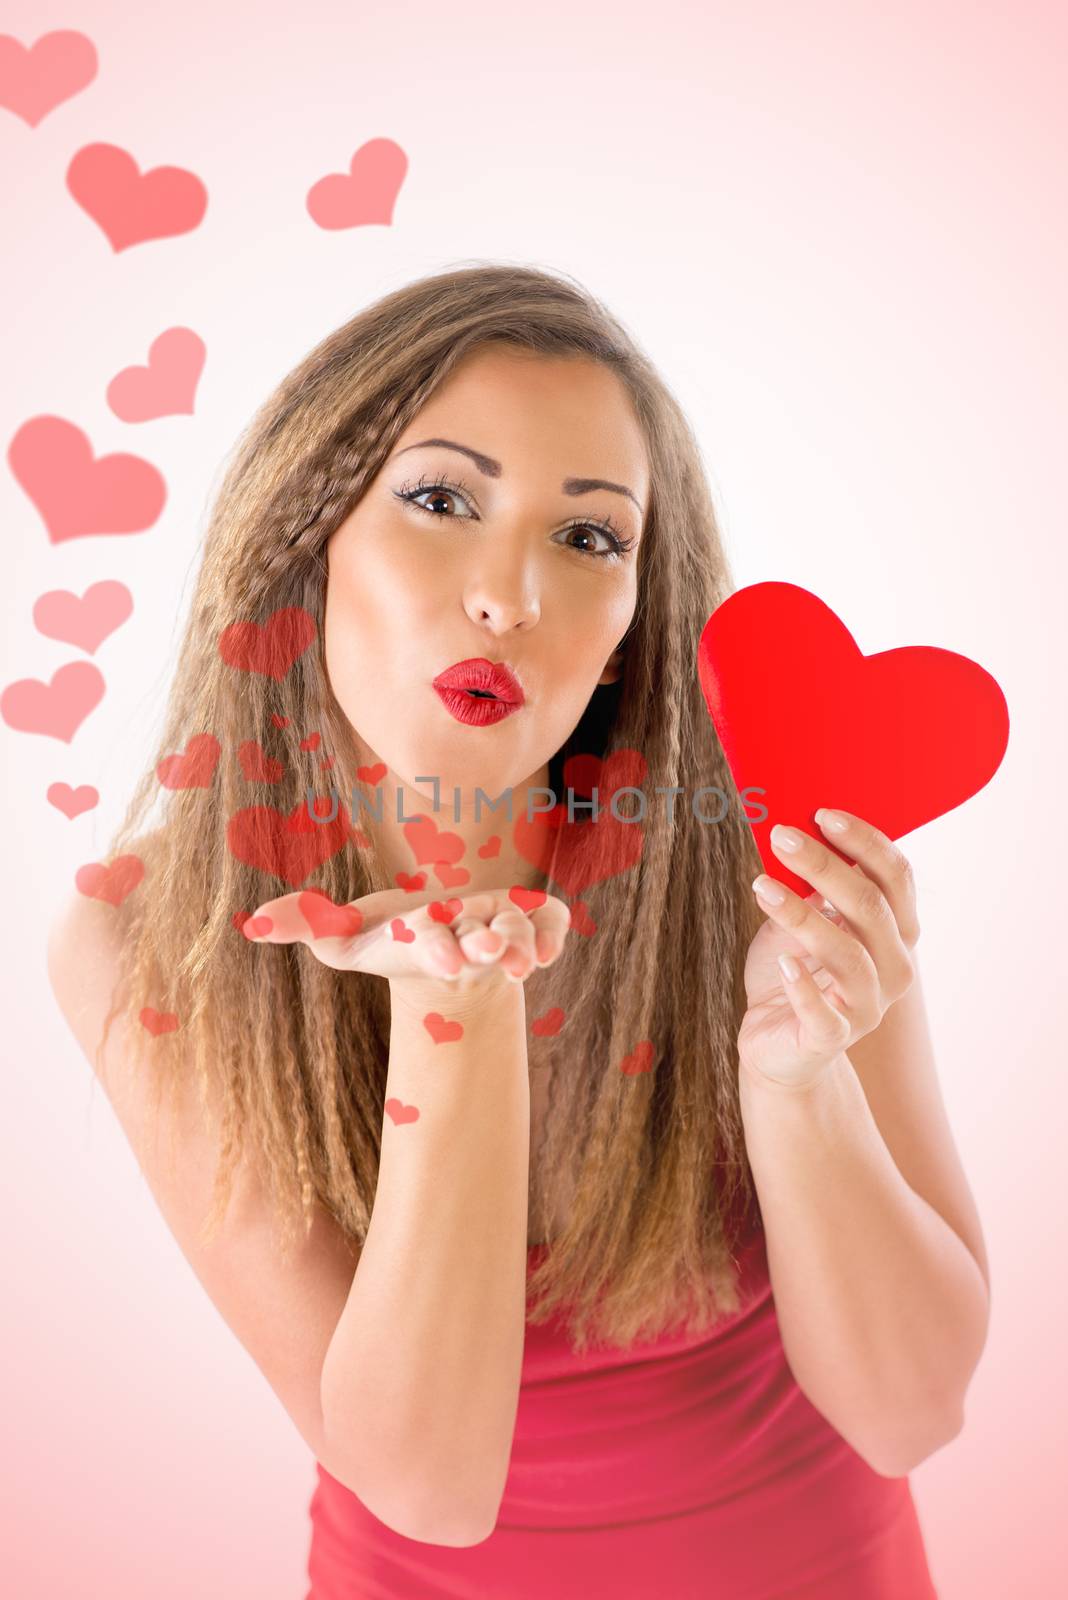 Beautiful smiling girl holding red heart. She is sending a kiss with many flying heart. Looking at camera.